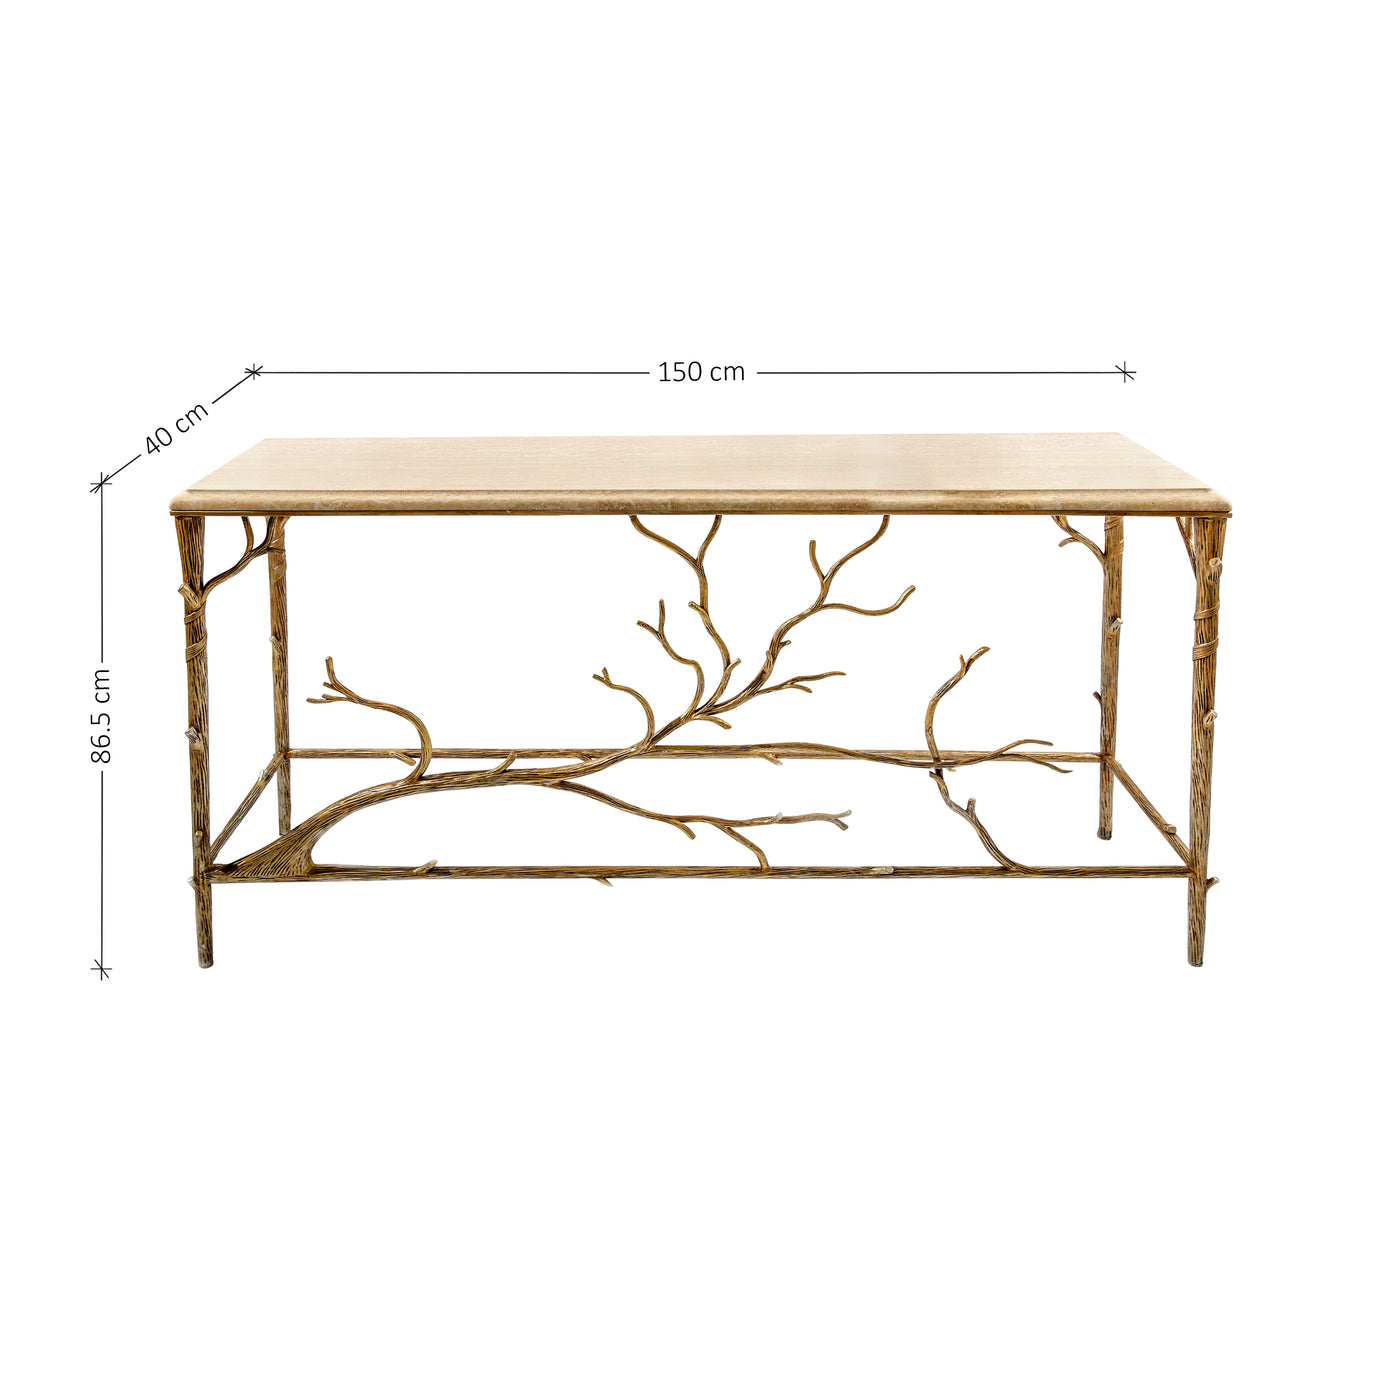 A luxury console with an organic branch-inspired base painted in an antique champagne finish, and topped with travertine marble; with annotated dimensions